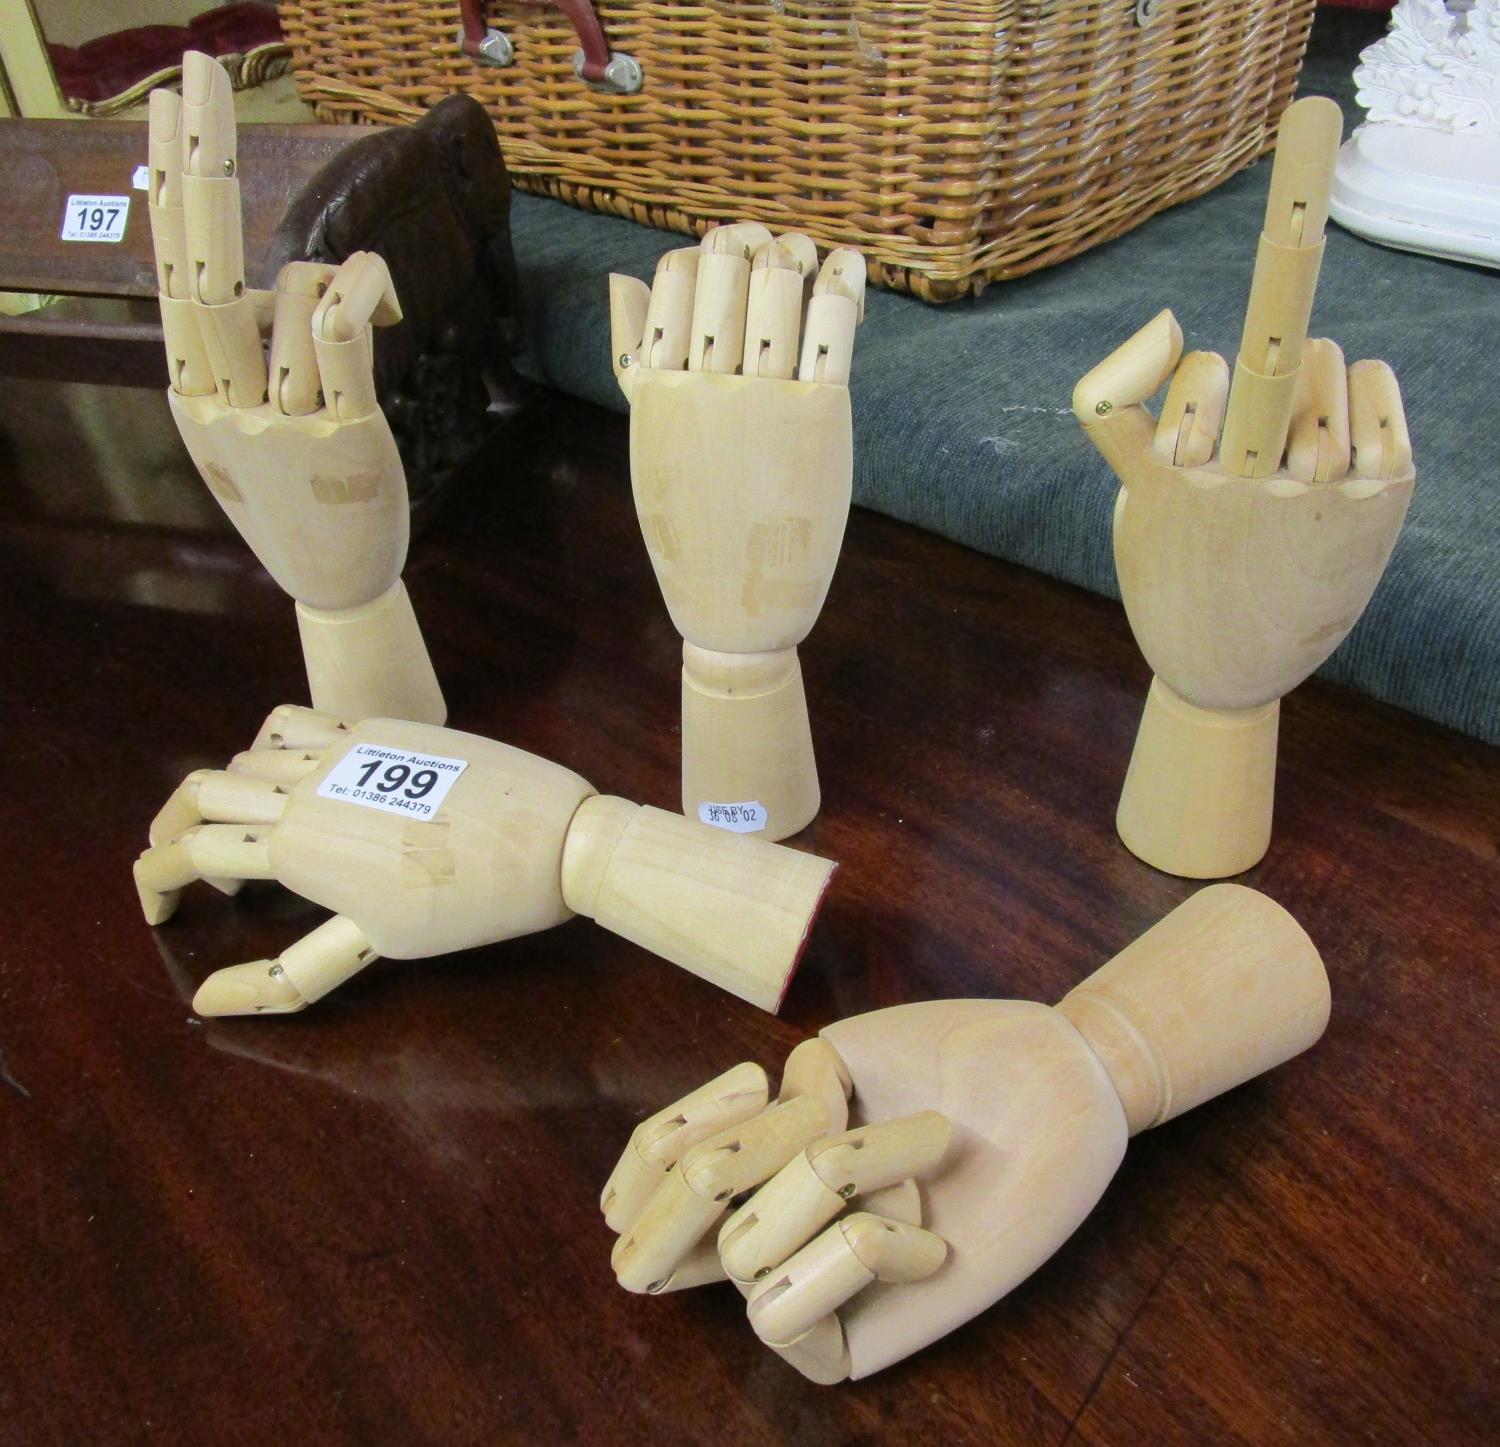 Collection of five articulated wooden artist's hands